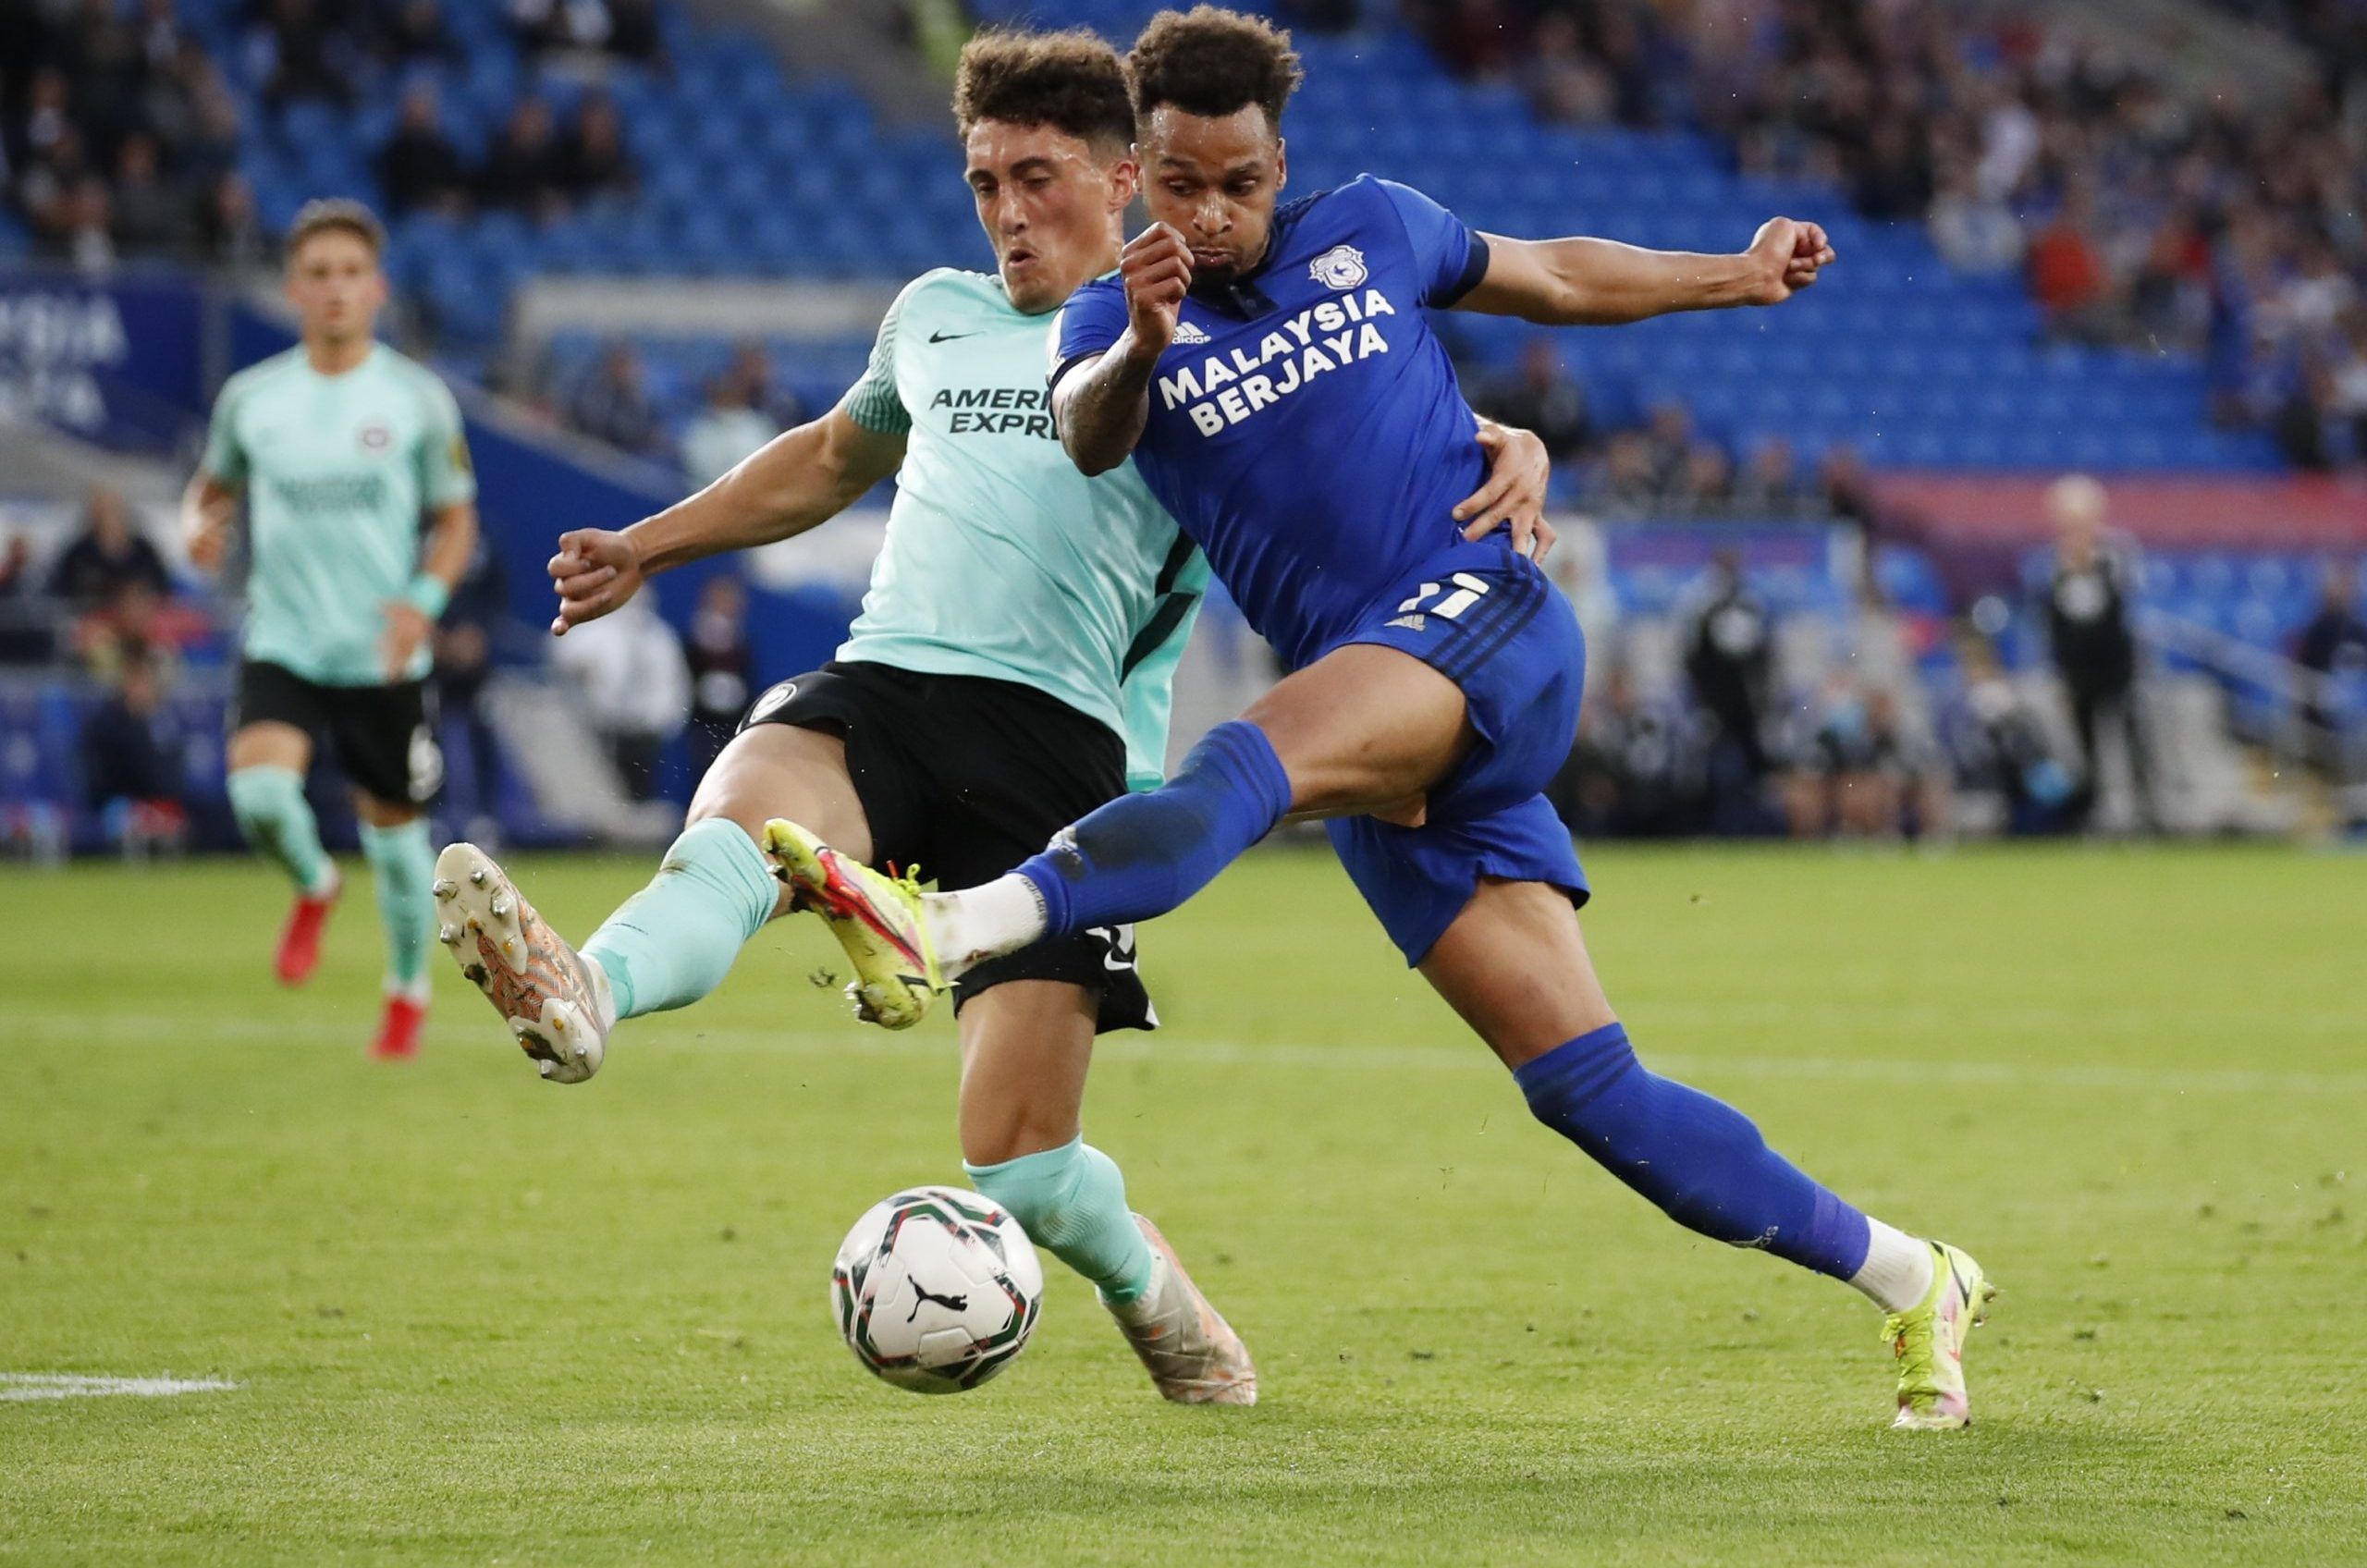 Soccer - England - Carabao Cup Second Round - Cardiff City v Brighton &amp; Hove Albion - Cardiff City Stadium, Cardiff, Britain - August 24, 2021 Cardiff City's Josh Murphy in action with Brighton &amp; Hove Albion's Haydon Roberts Action Images via Reuters/Peter Cziborra